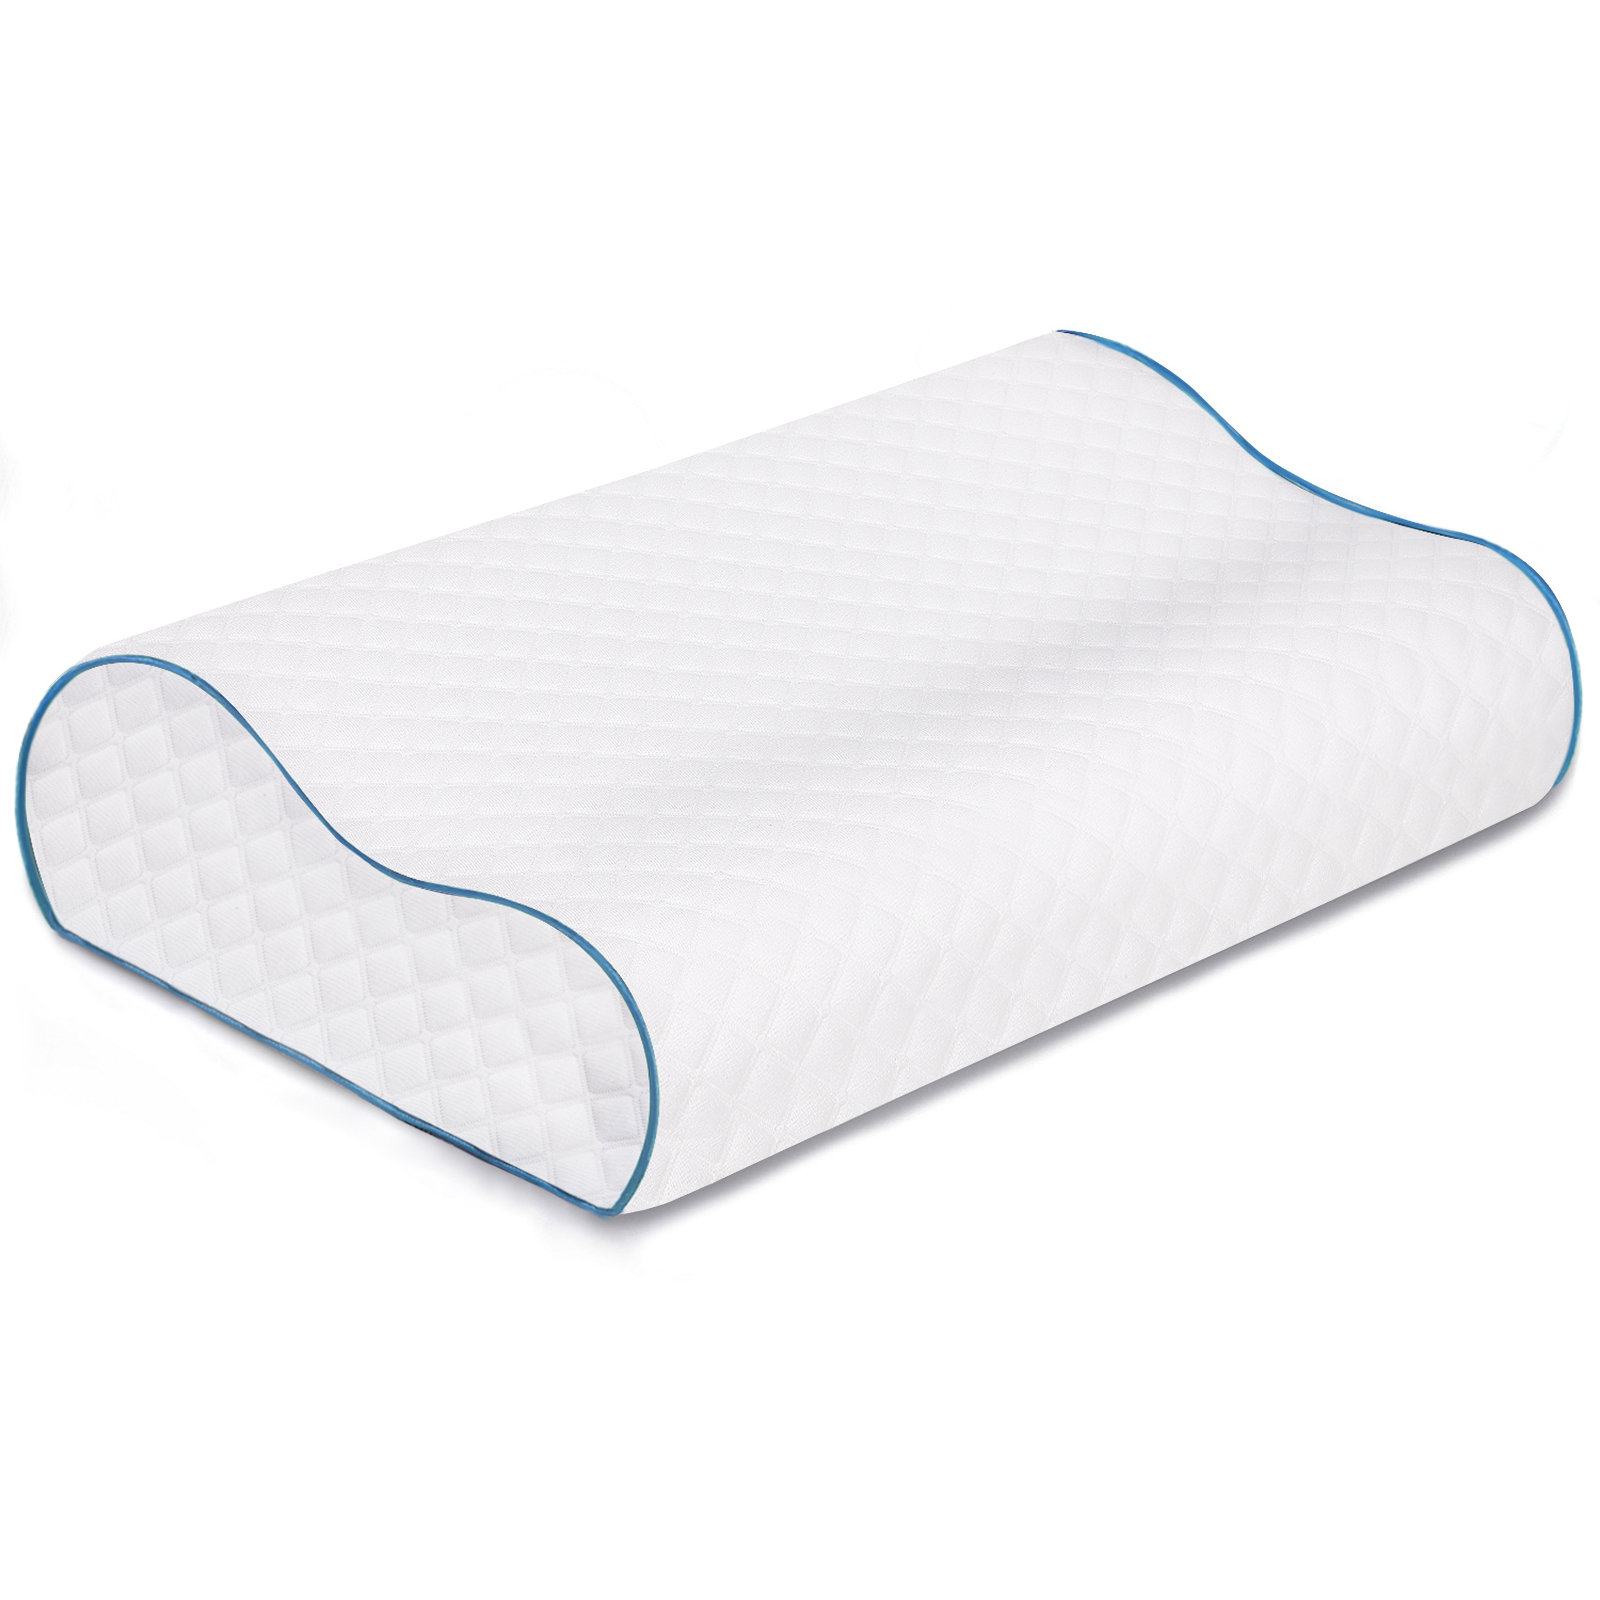 LUXURY MEMORY FOAM CORE ORTHOPAEDIC EXTRA SUPPORT FIRM BED PILLOWS 